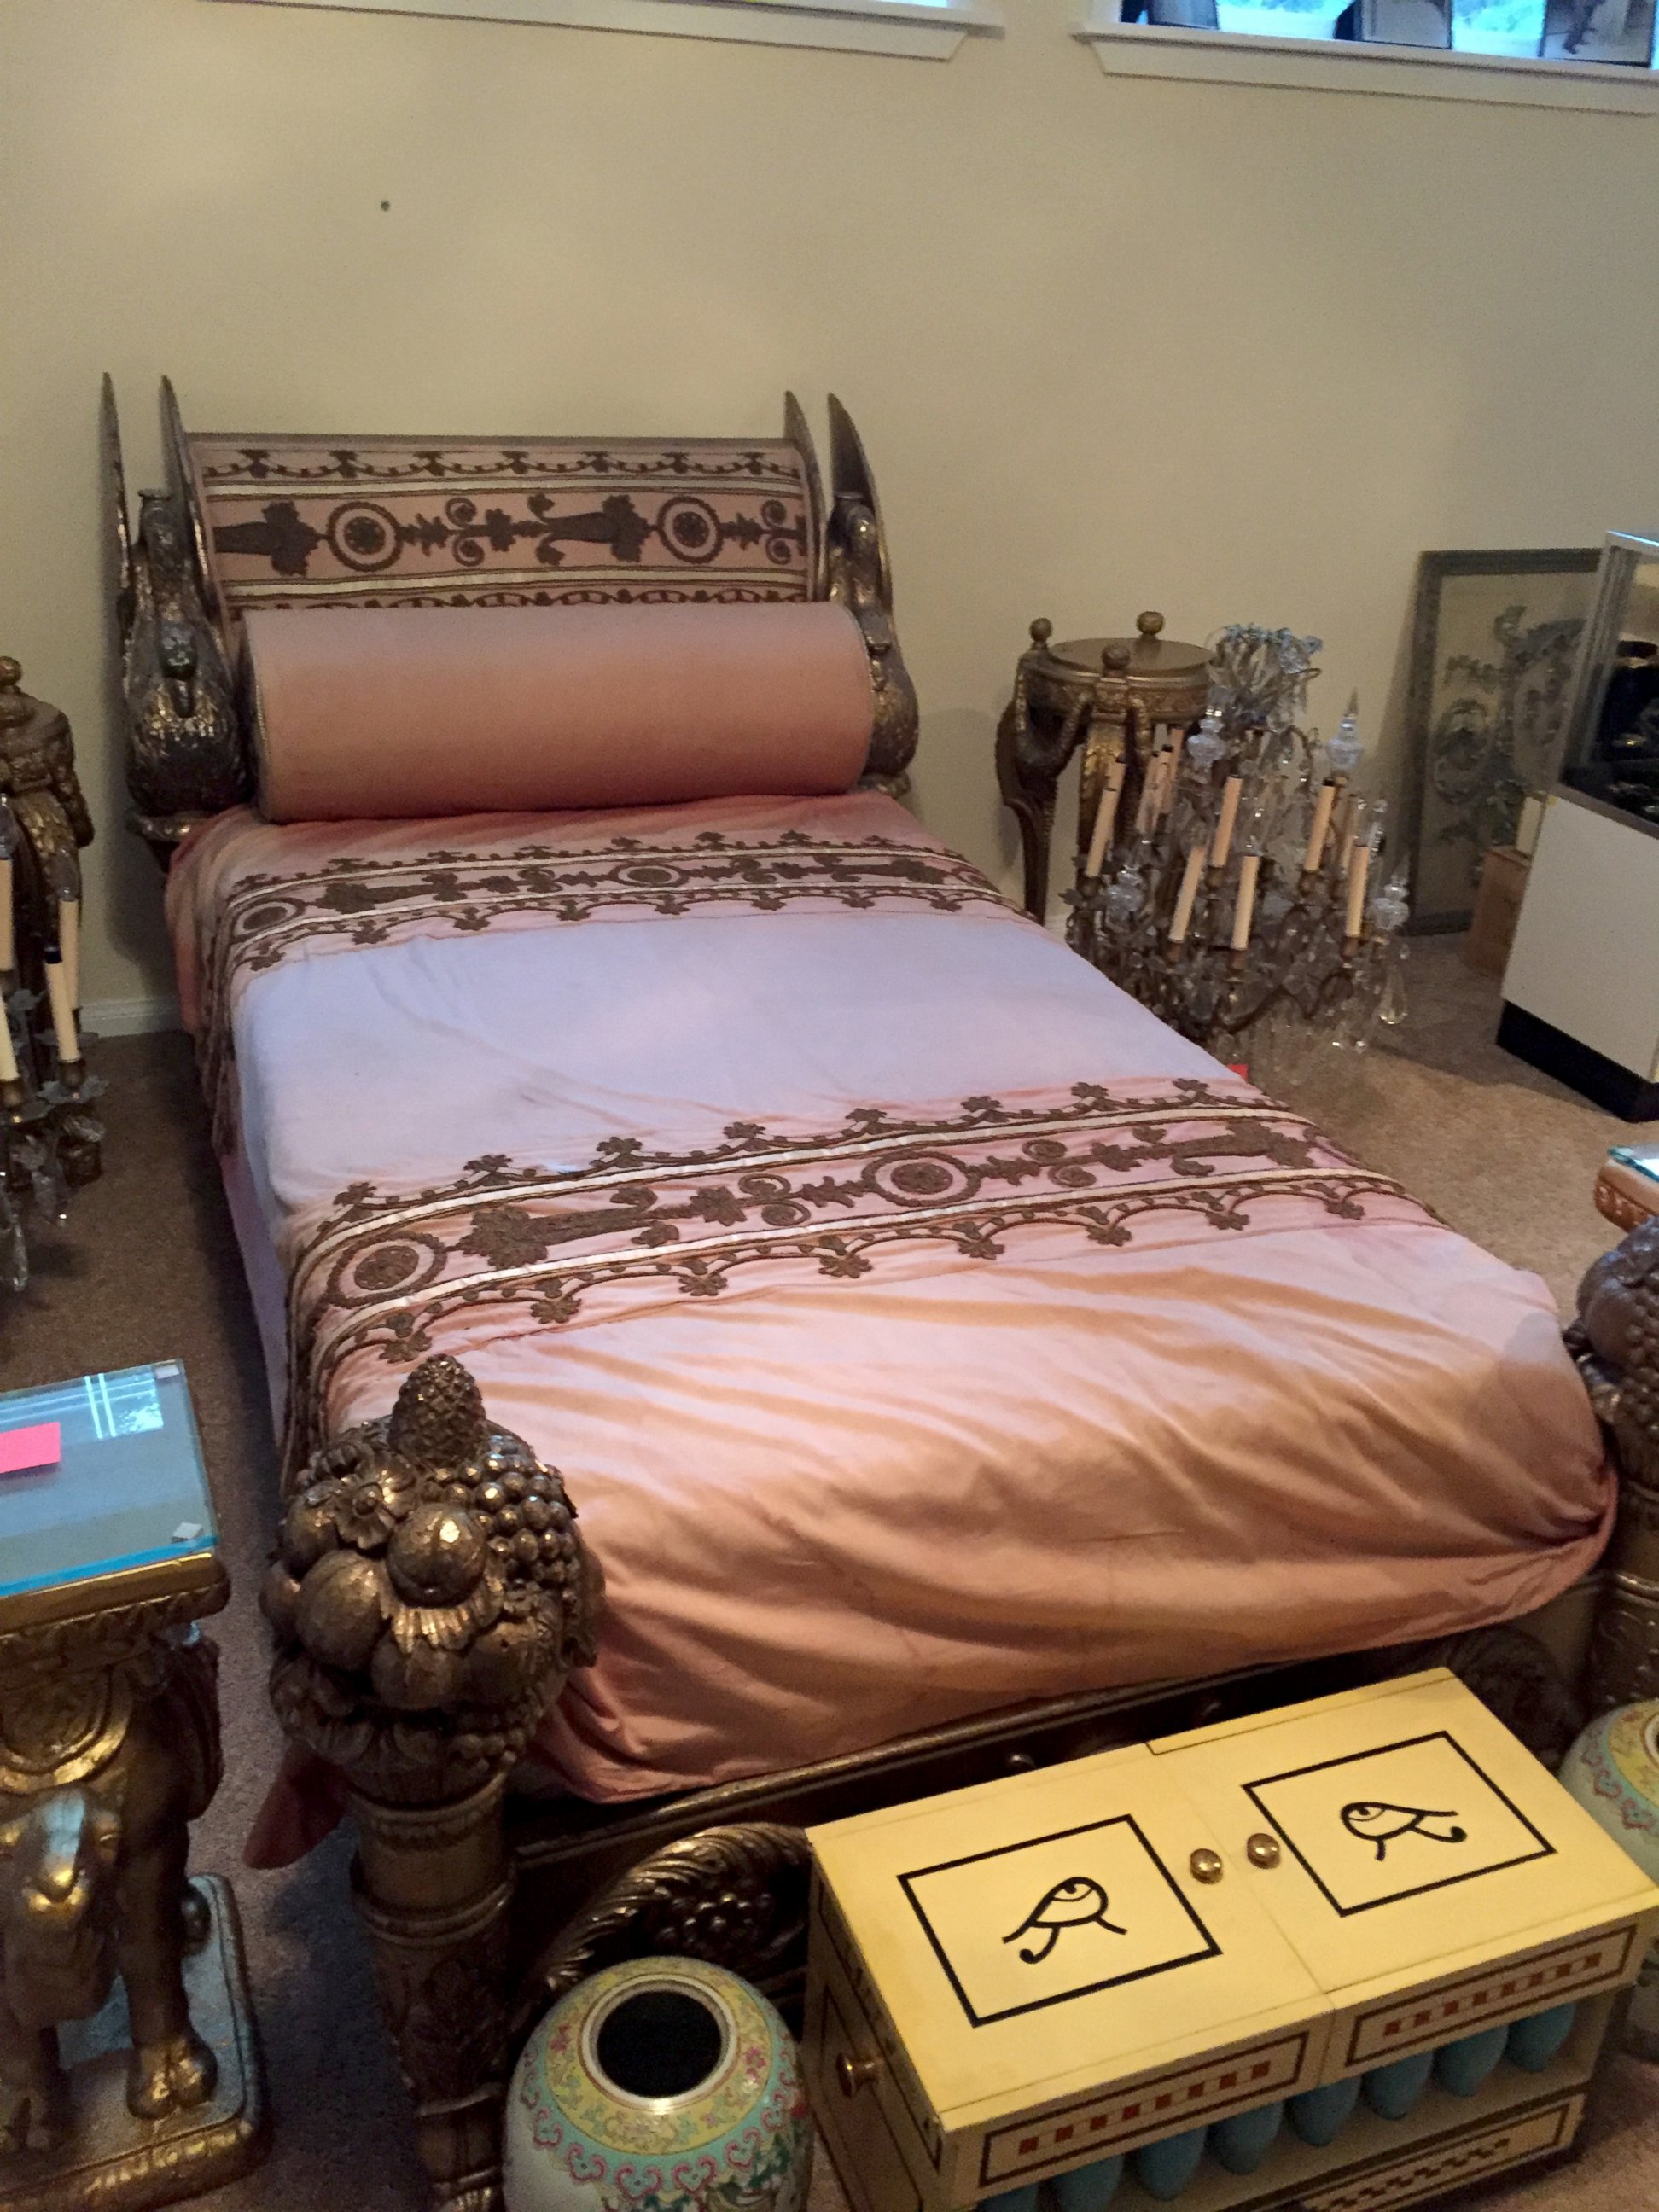 PHOTO: A bed in the home of Debbie Reynolds that was at one point used by her daughter, Carrie Fisher.